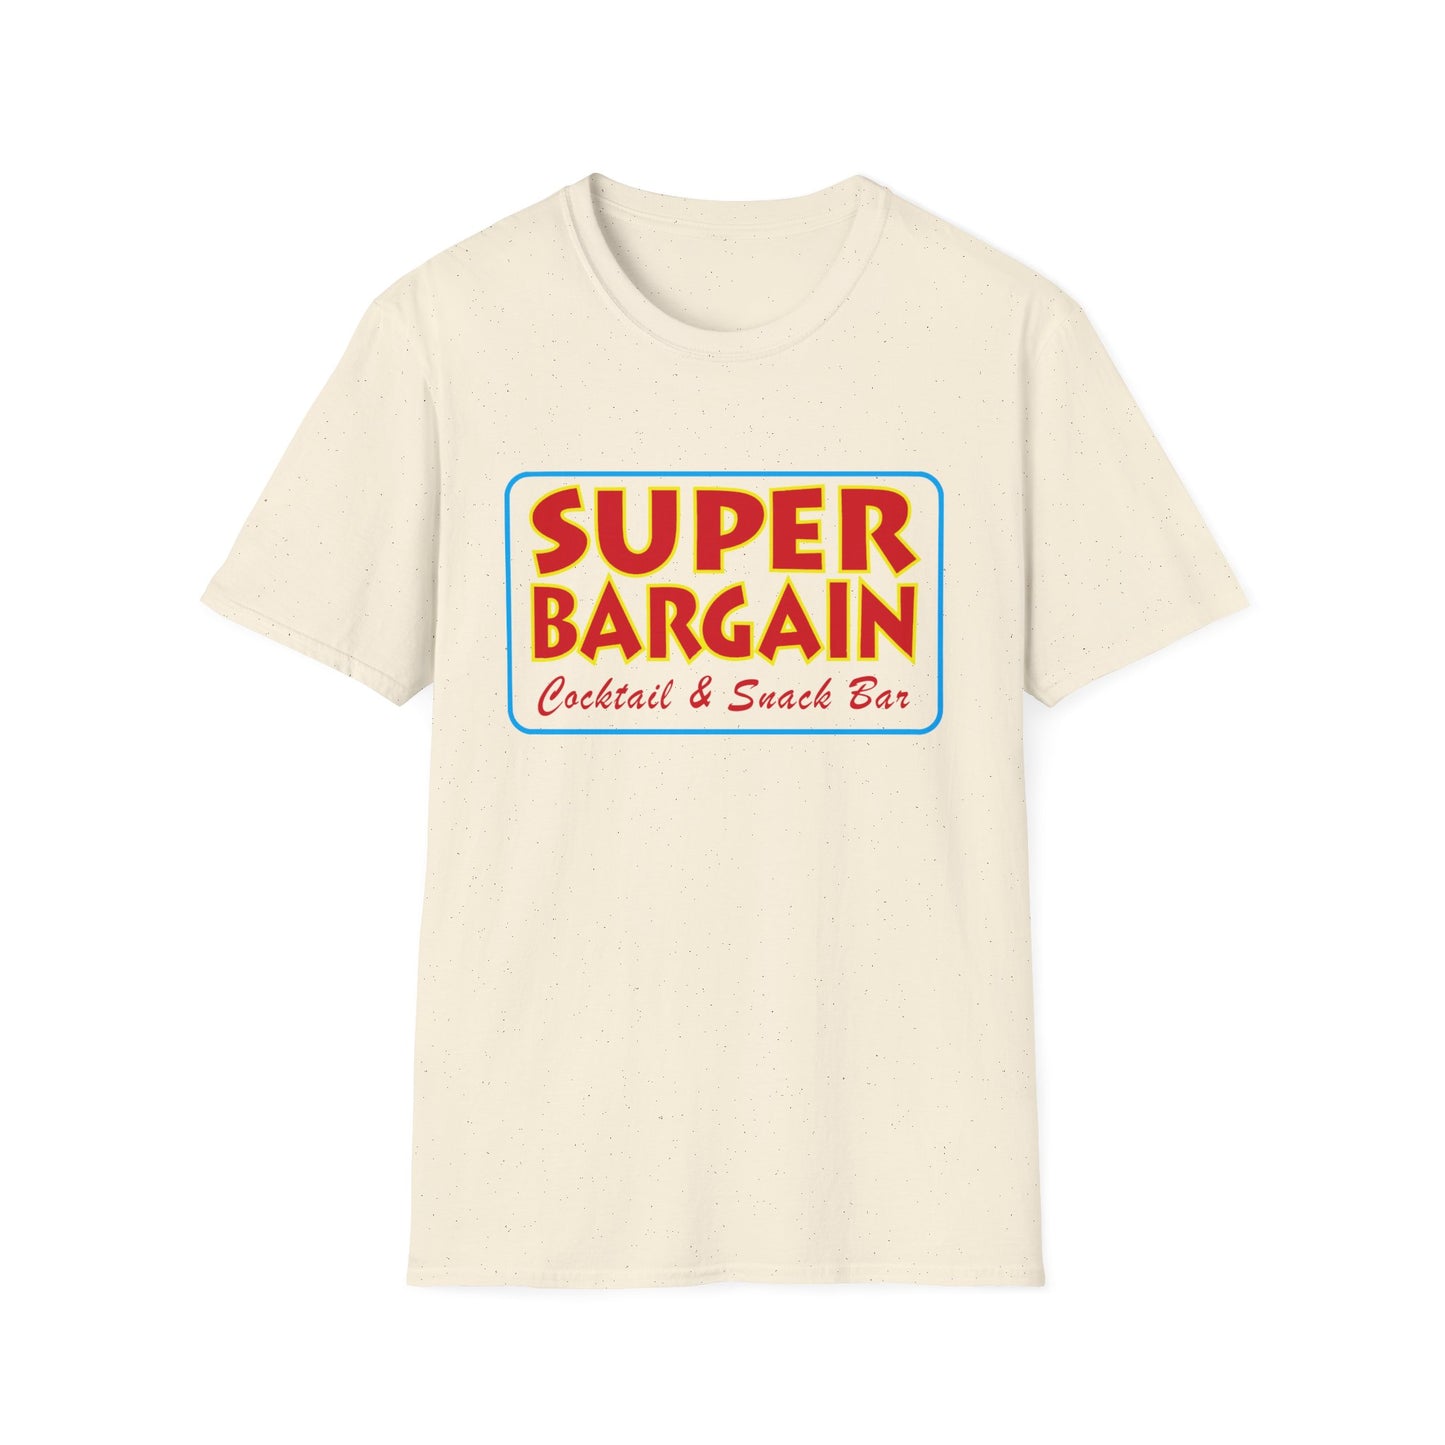 A Printify Unisex Softstyle Logo T-Shirt in cream color with a colorful "Super Bargain Cocktail & Snack Bar" logo centered on the chest area, featuring a tribute to Toronto's Cabbagetown. The text is encased in a red and blue border.